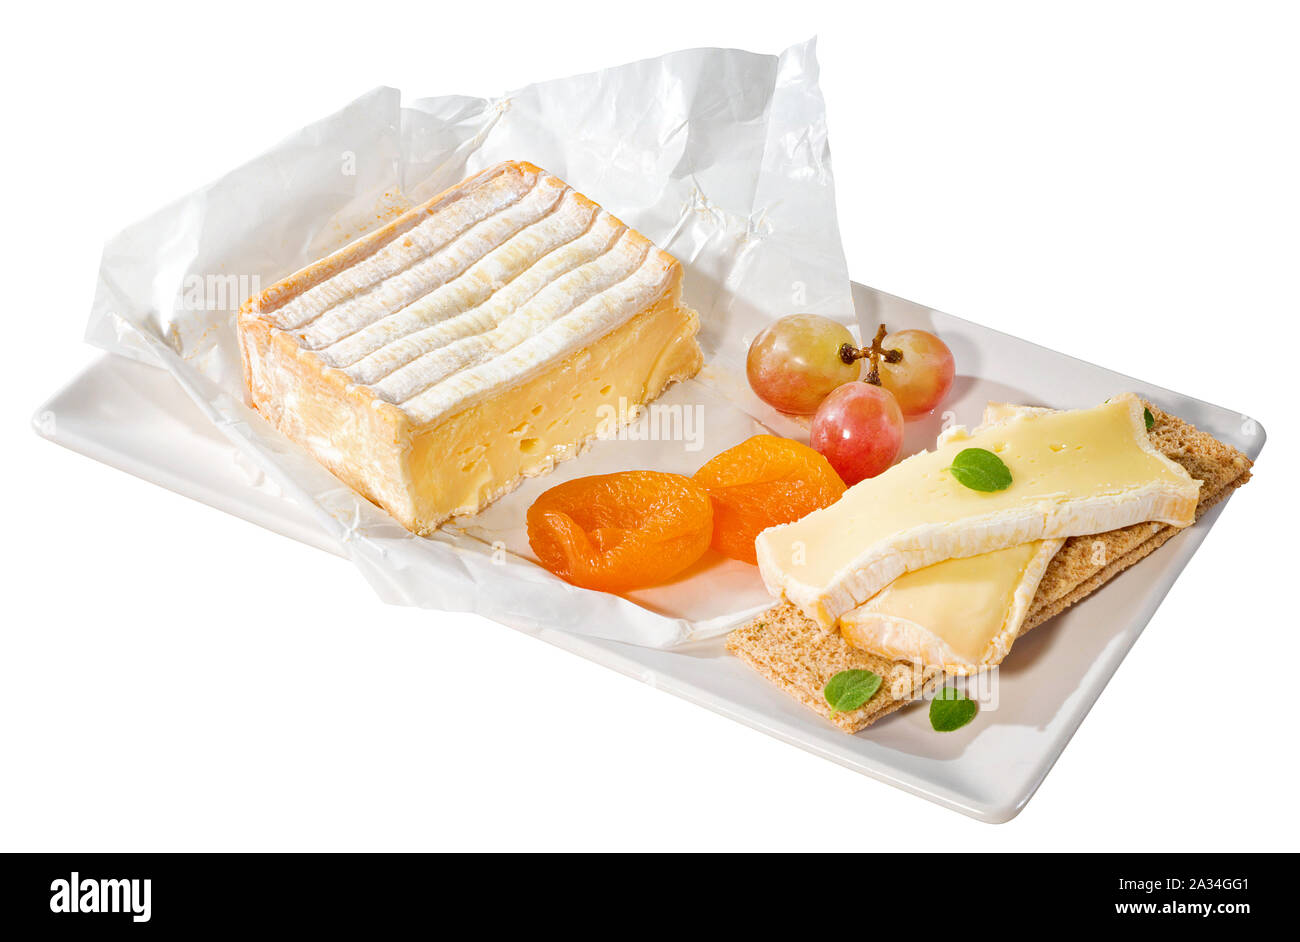 Camembert cheese on serving tray Stock Photo